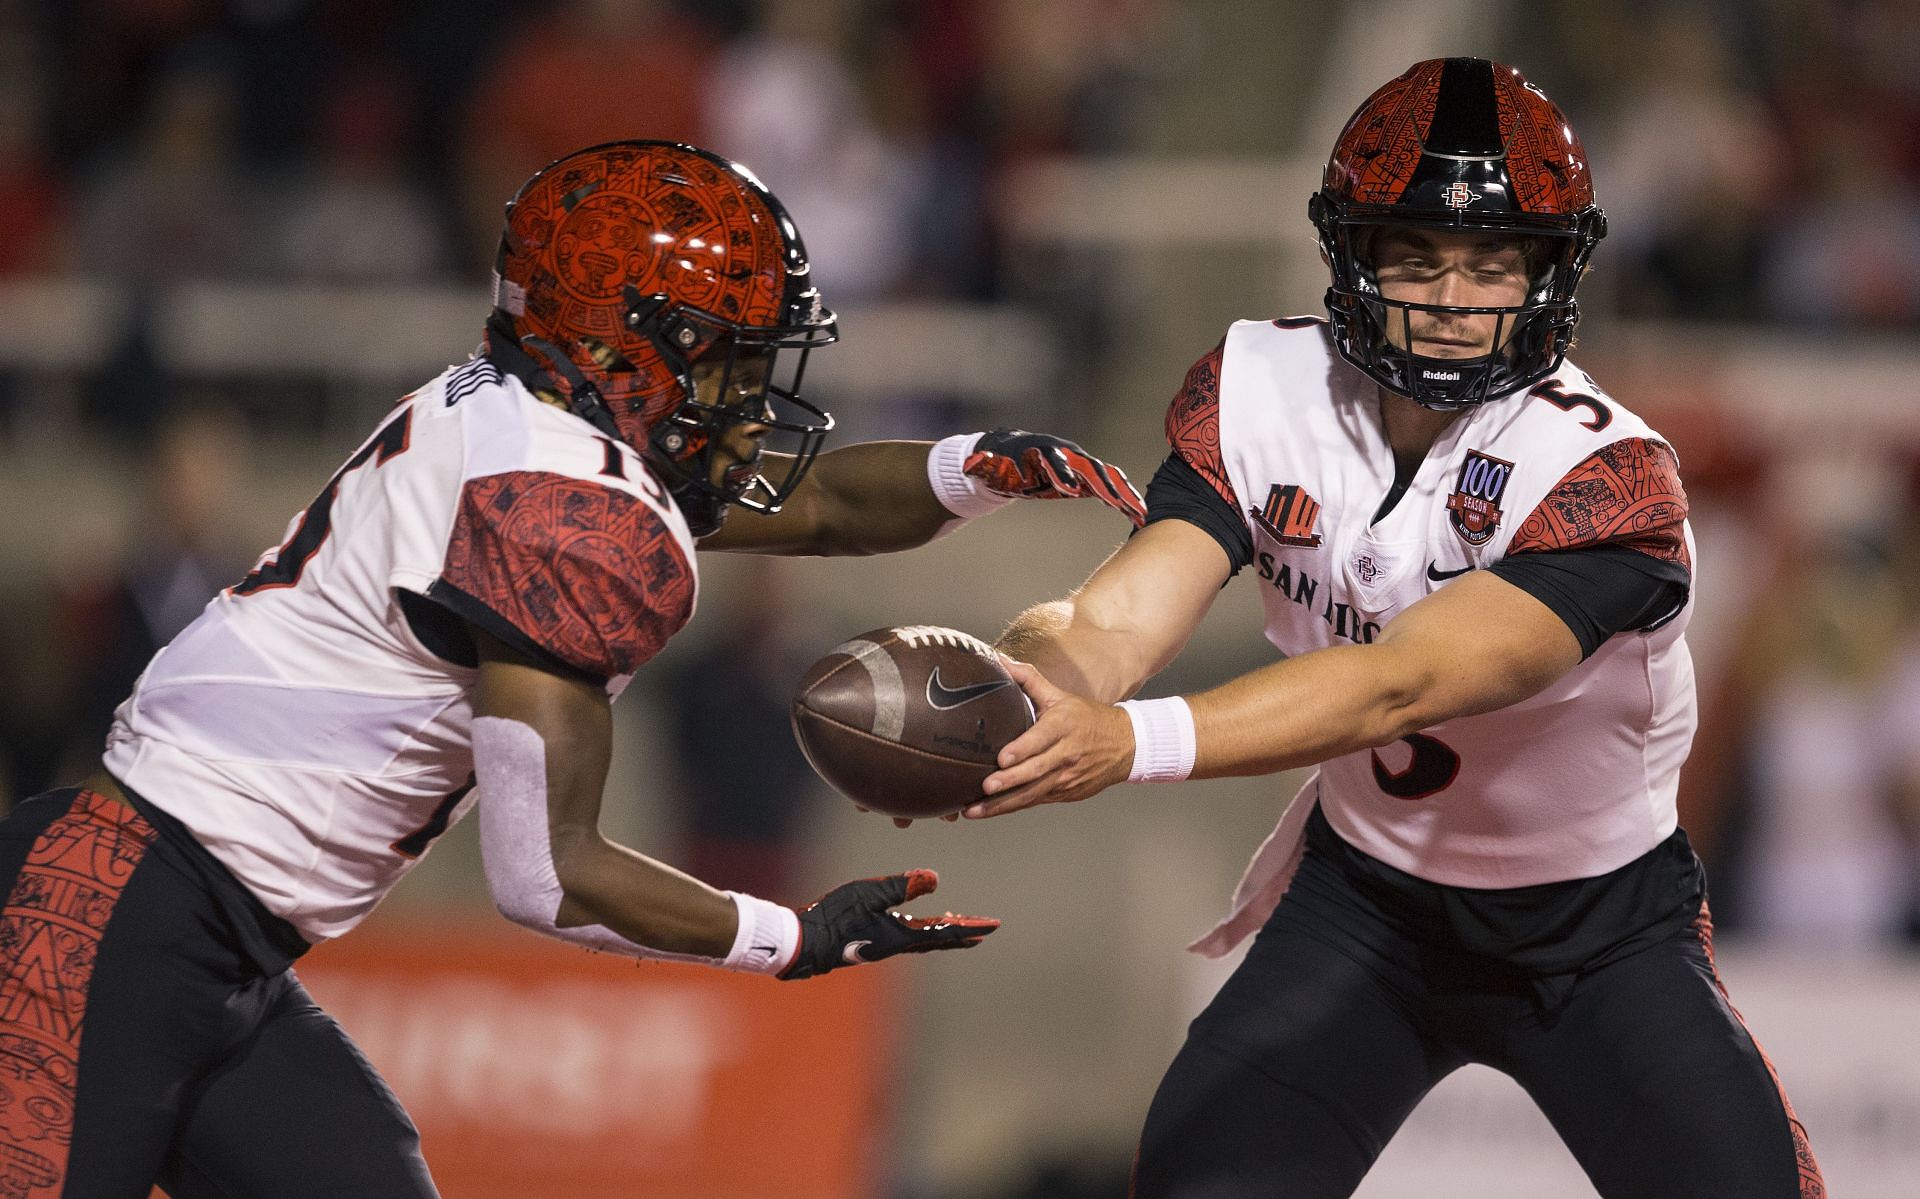 Aztecs Open Mountain West Play Against Boise State, NewsCenter